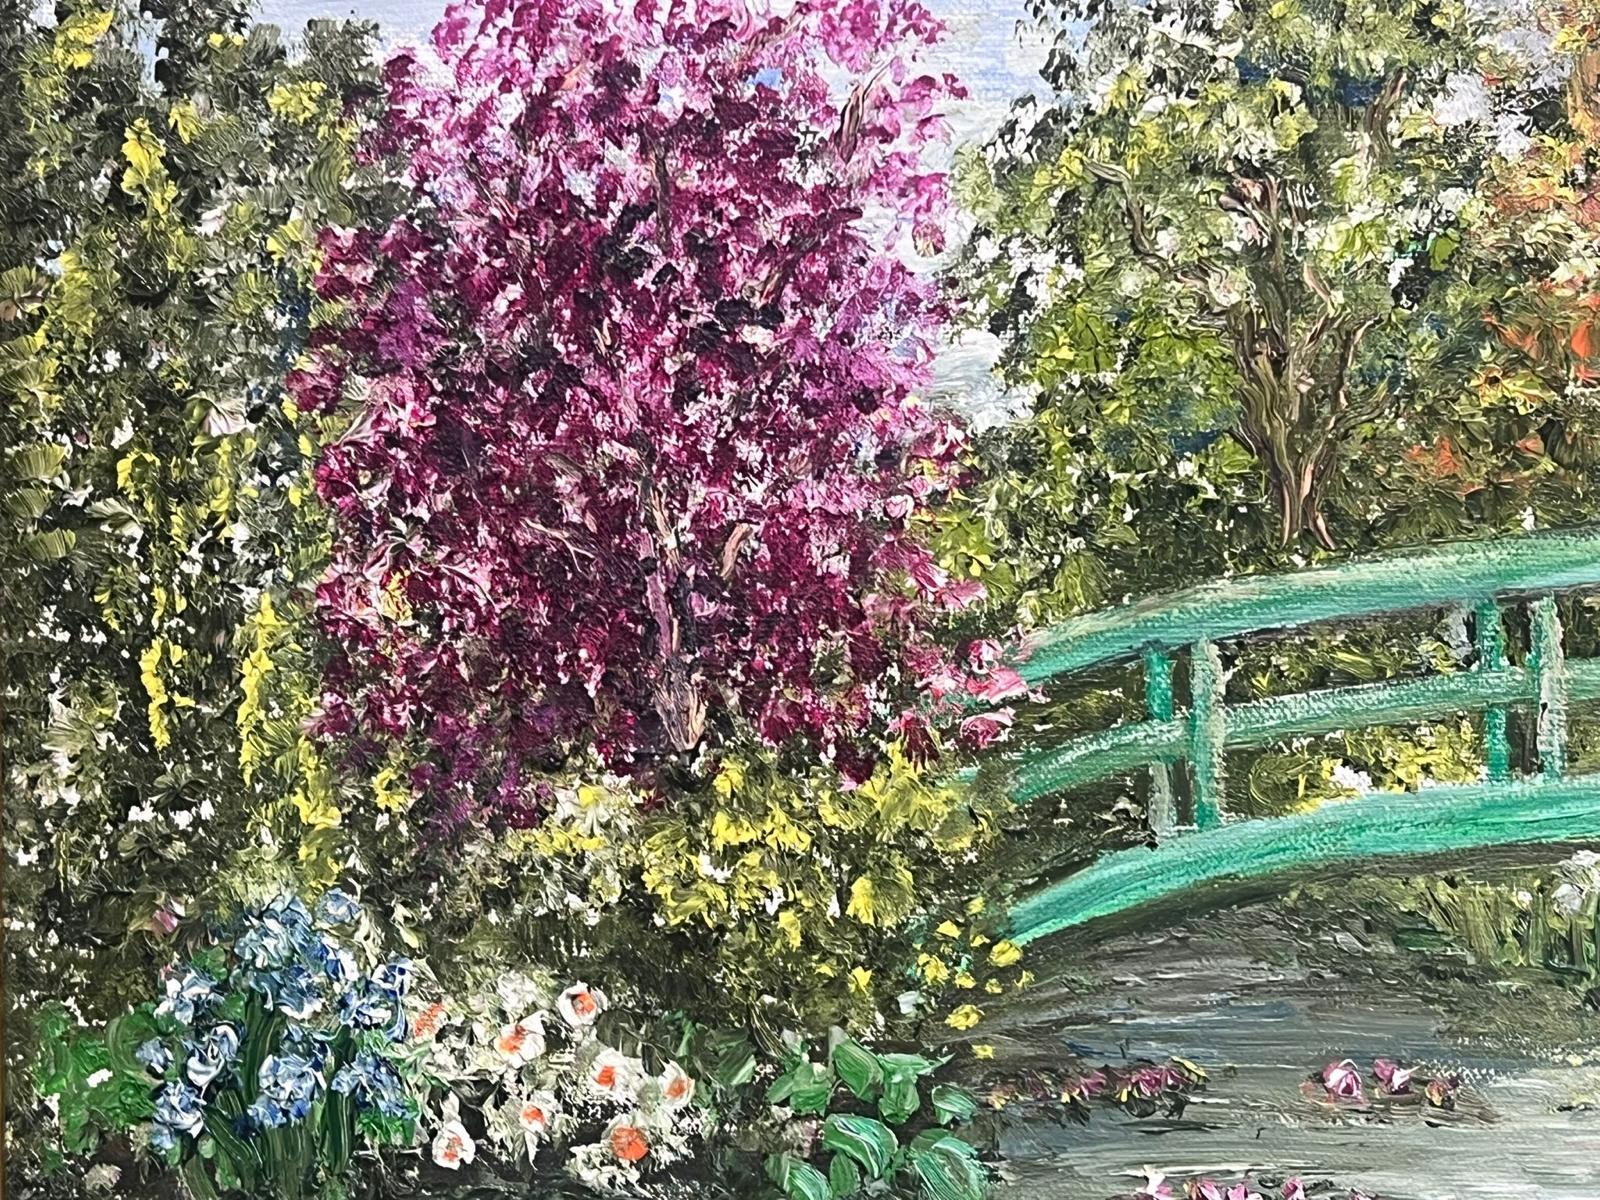 Japanese Bridge Monet's Waterlily Pond Giverny Signed French Impressionist Oil For Sale 1